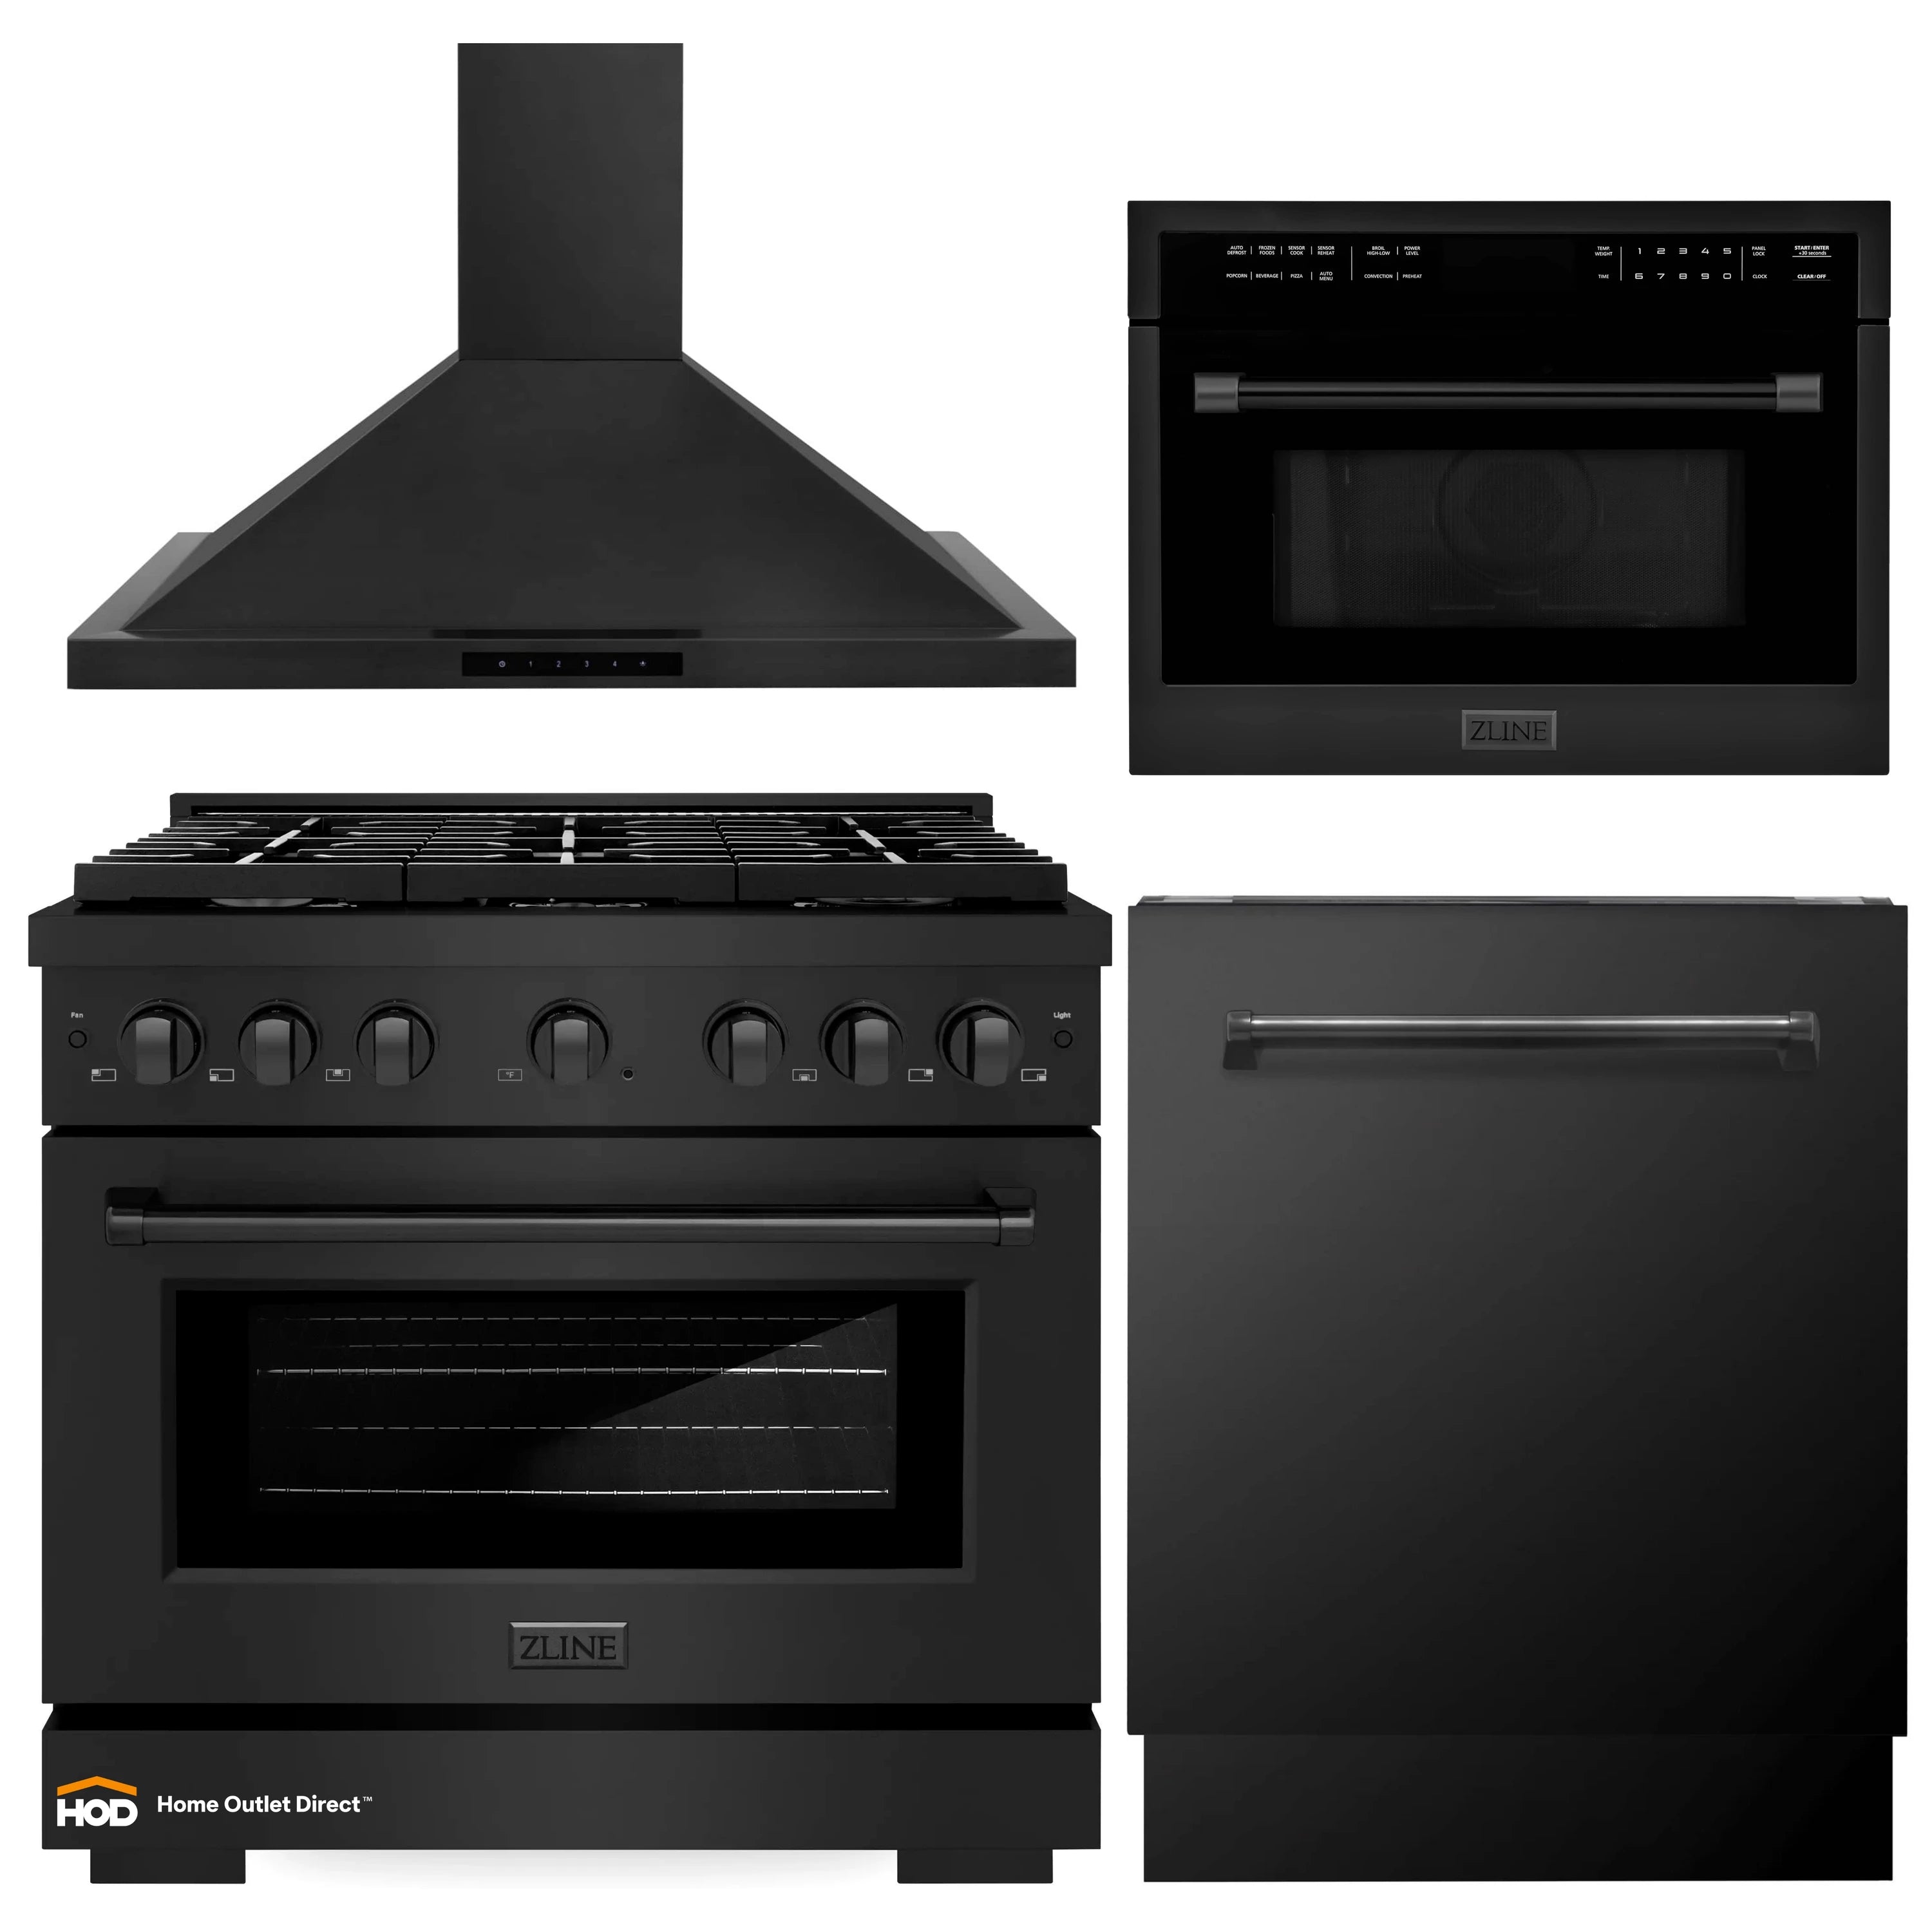 ZLINE 4-Piece Appliance Package - 36-Inch Gas Range, Convertible Wall Mount Hood, Microwave Oven, and 3-Rack Dishwasher in Black Stainless Steel (4KP-RGBRH36-MODWV)